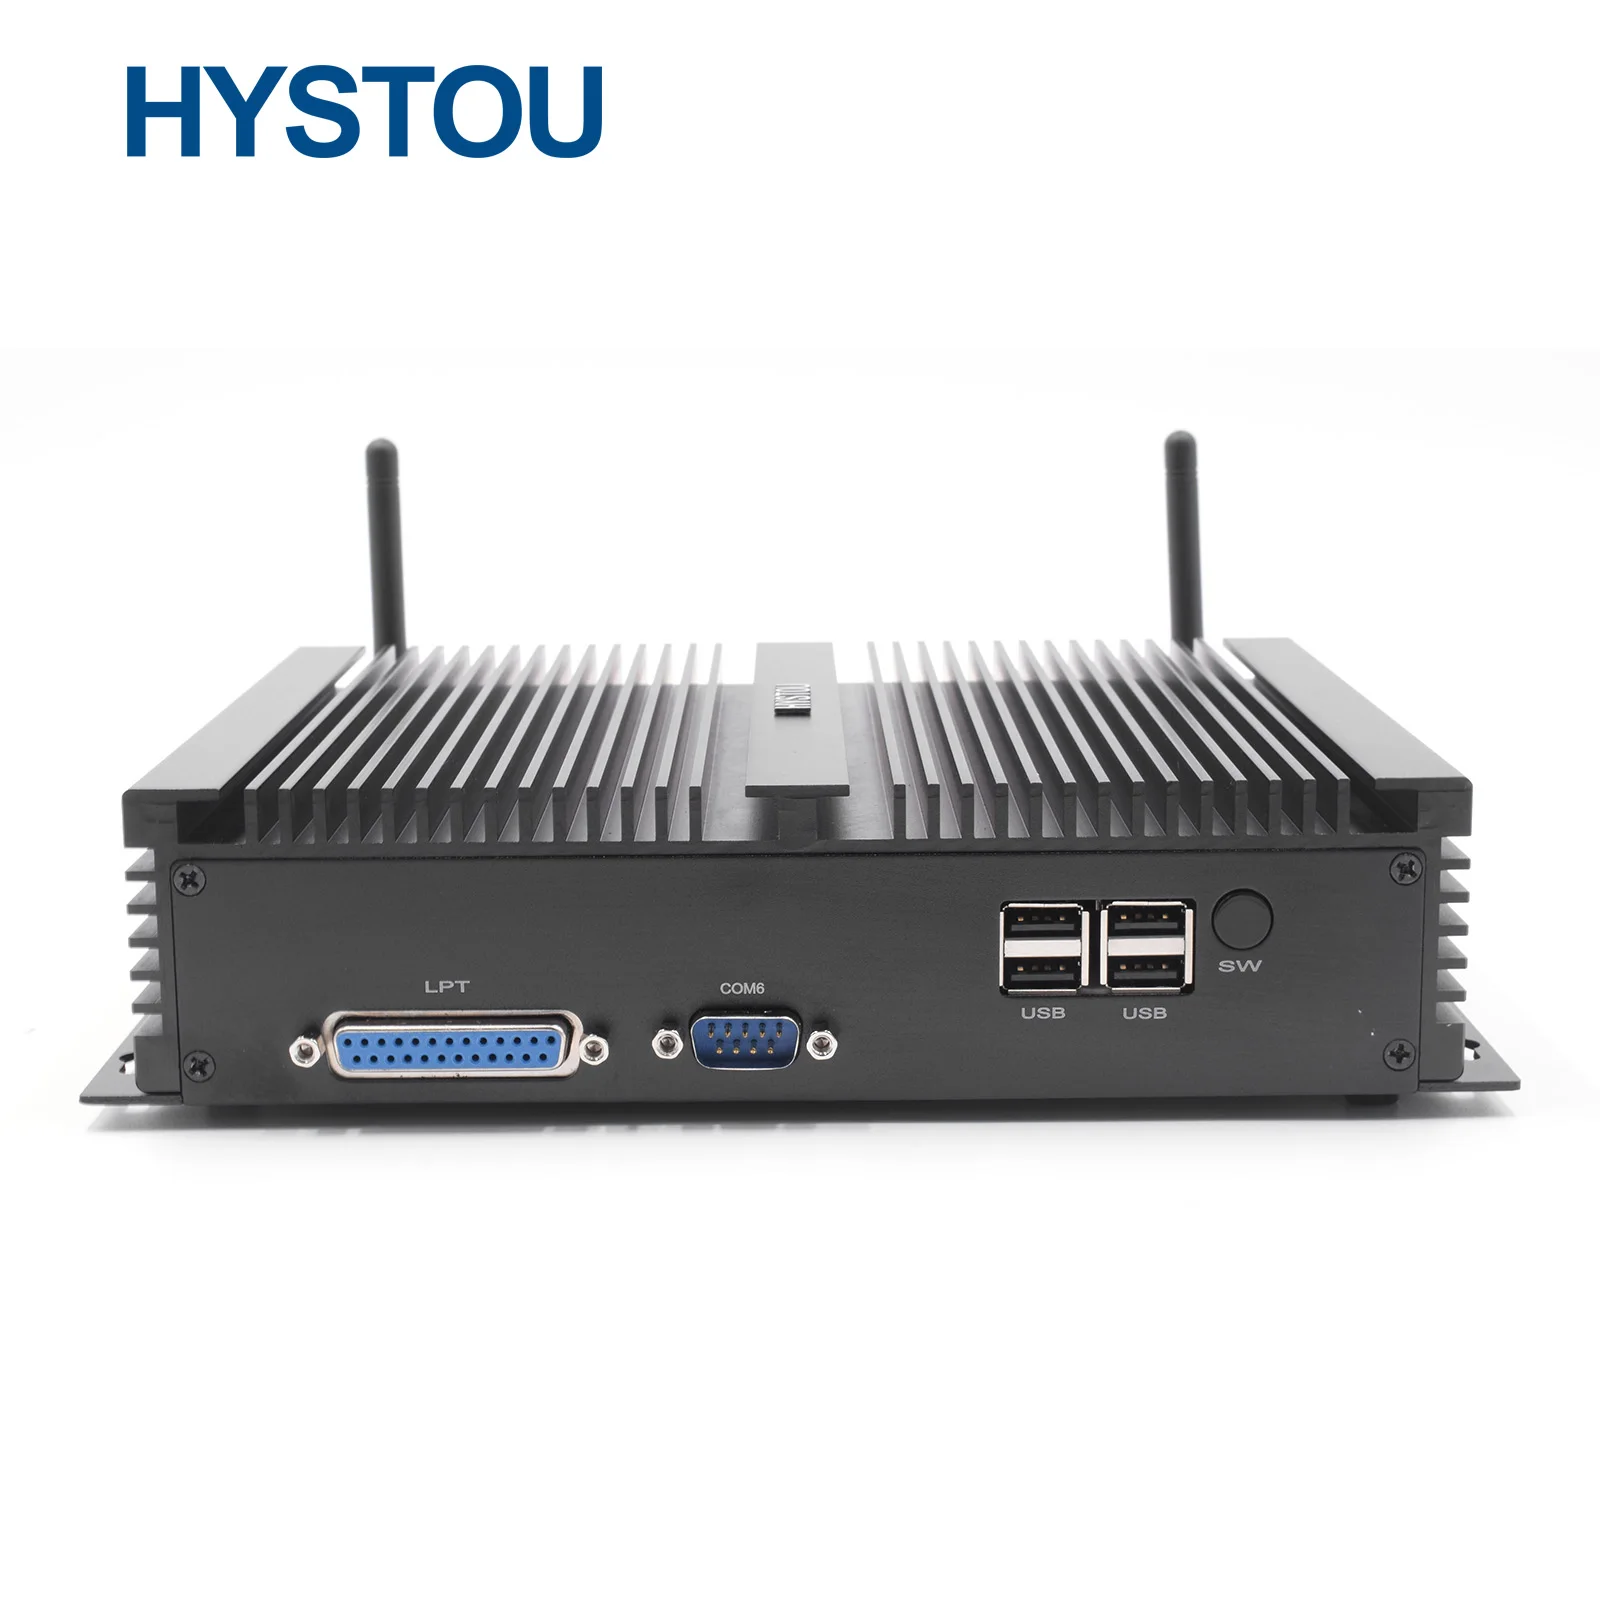 

HYSTOU Gaming Office PC Desktop Computer Mini CPU i7 Core i7 8550u Fanless Industrial PC with LPT